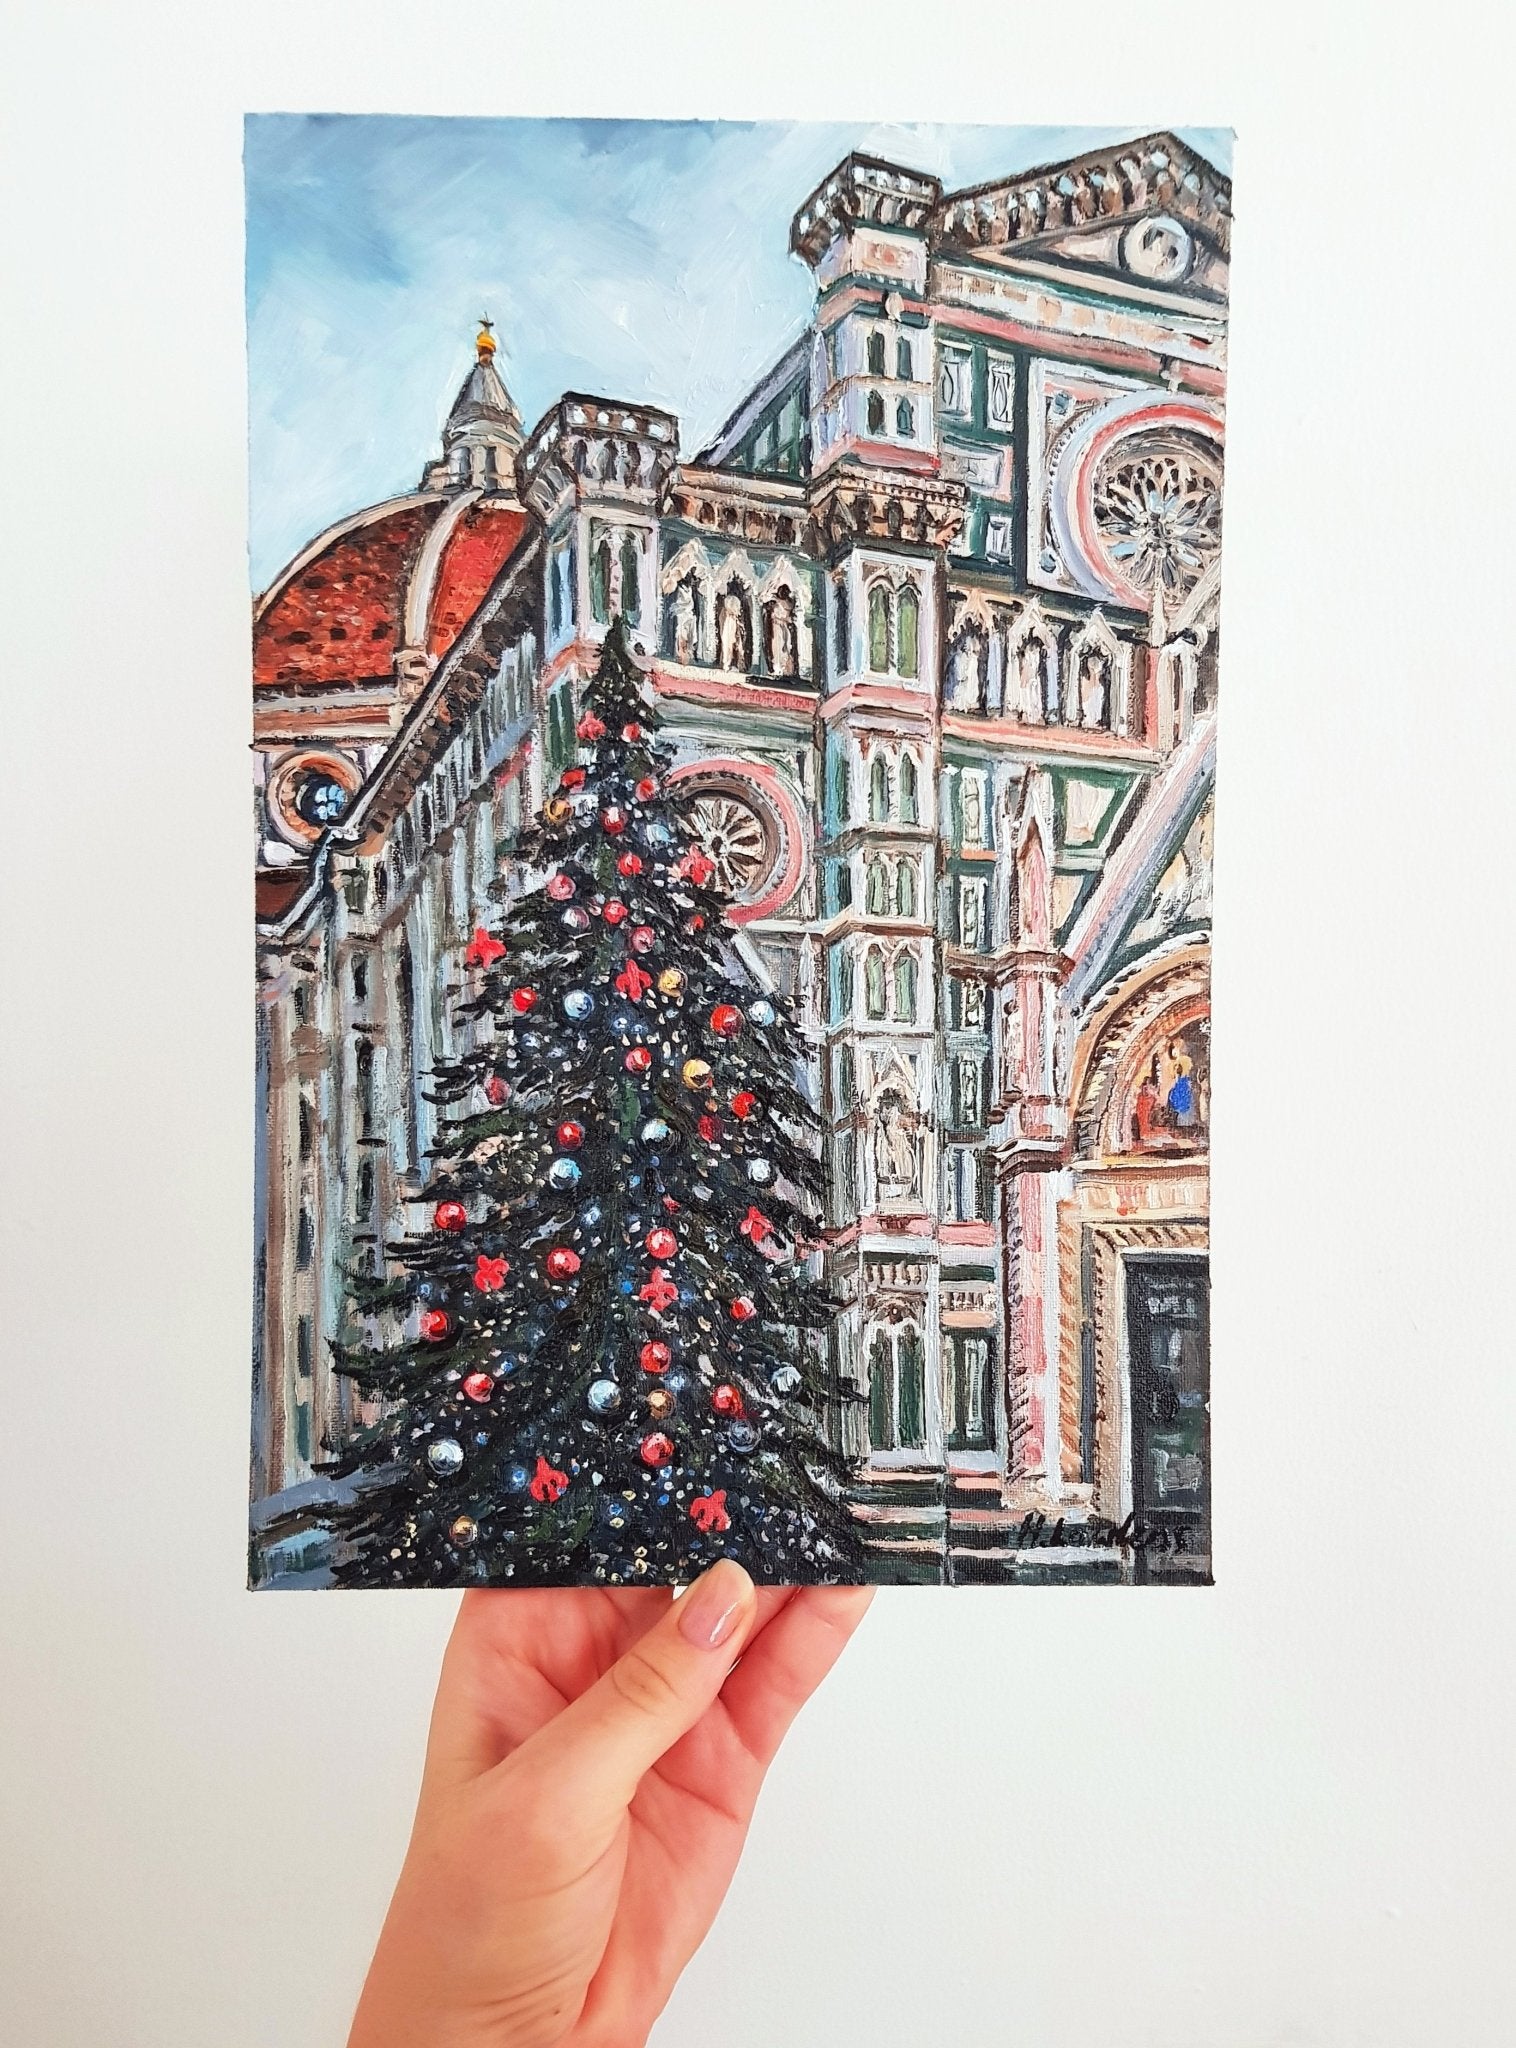 Natale a Firenze | Original Painting Original Paintings Harriet Lawless Artist italy